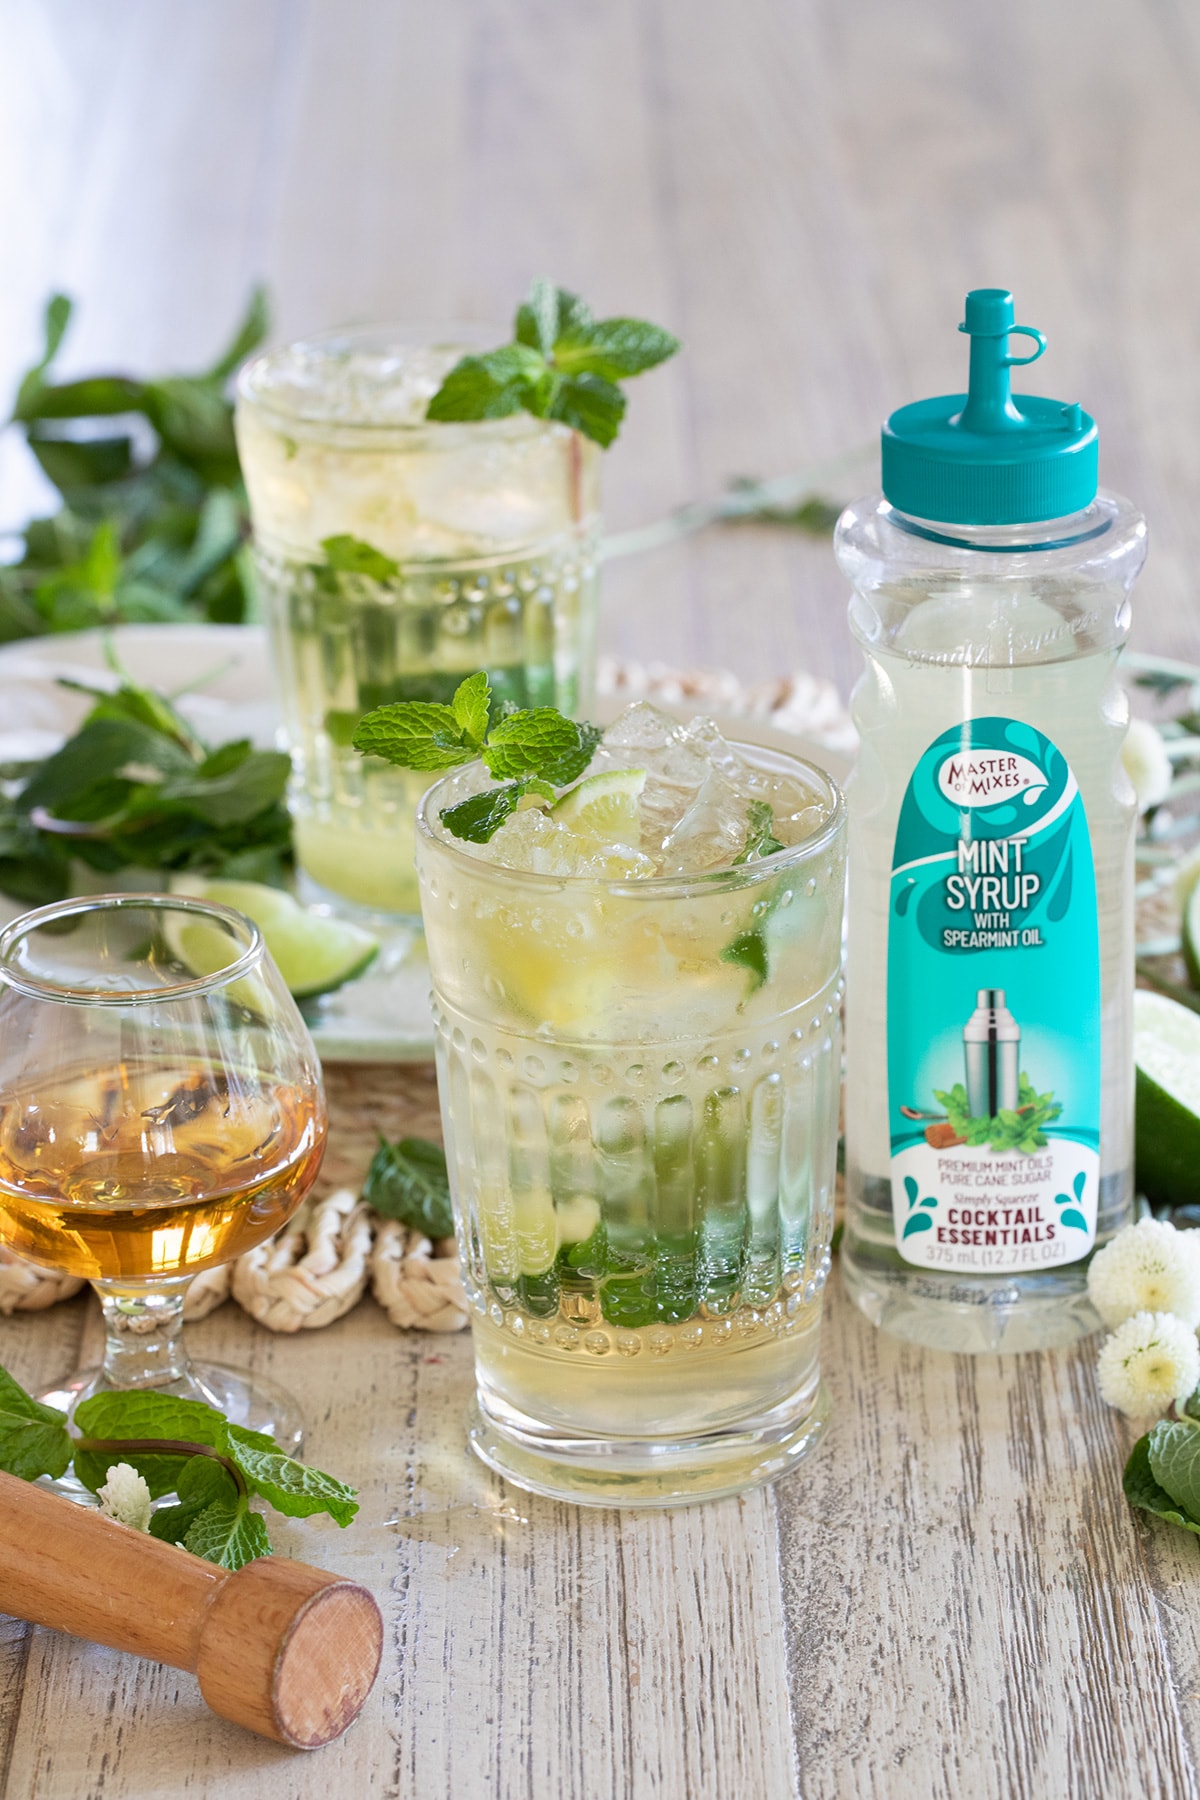 Irish Mint Mojitos are the perfect St. Patrick's Day cocktail made with Irish Whiskey, Mint Simple Syrup, muddled mint and limes and topped with club soda. #stpatricksday #mojito #whiskeycocktail #irishmojito